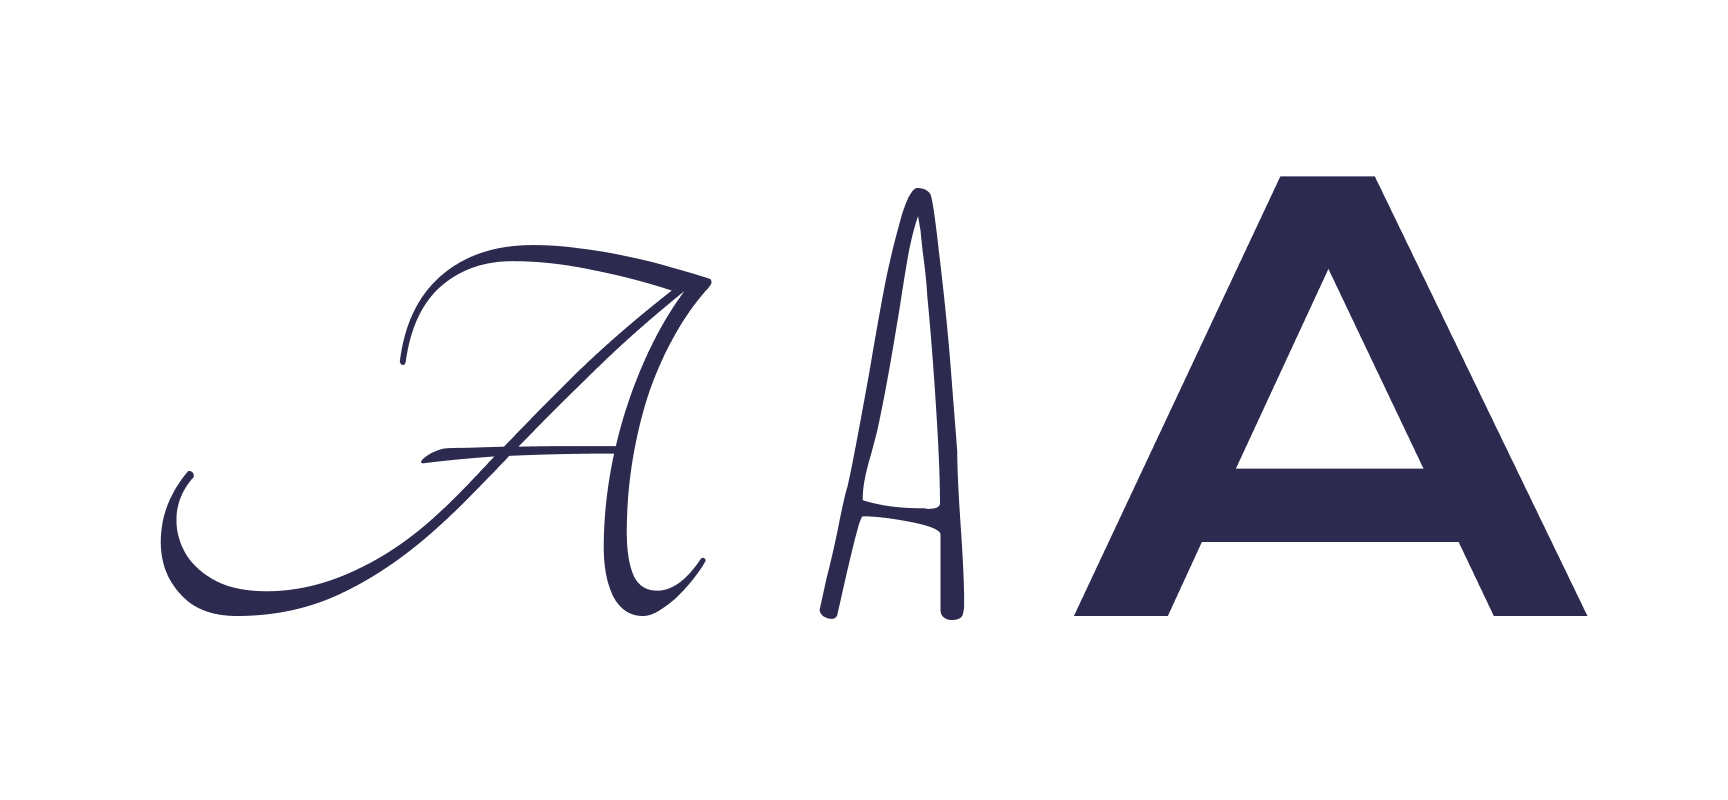 An uppercase 'a' character shown in three different fonts: each character has a different size and shape.